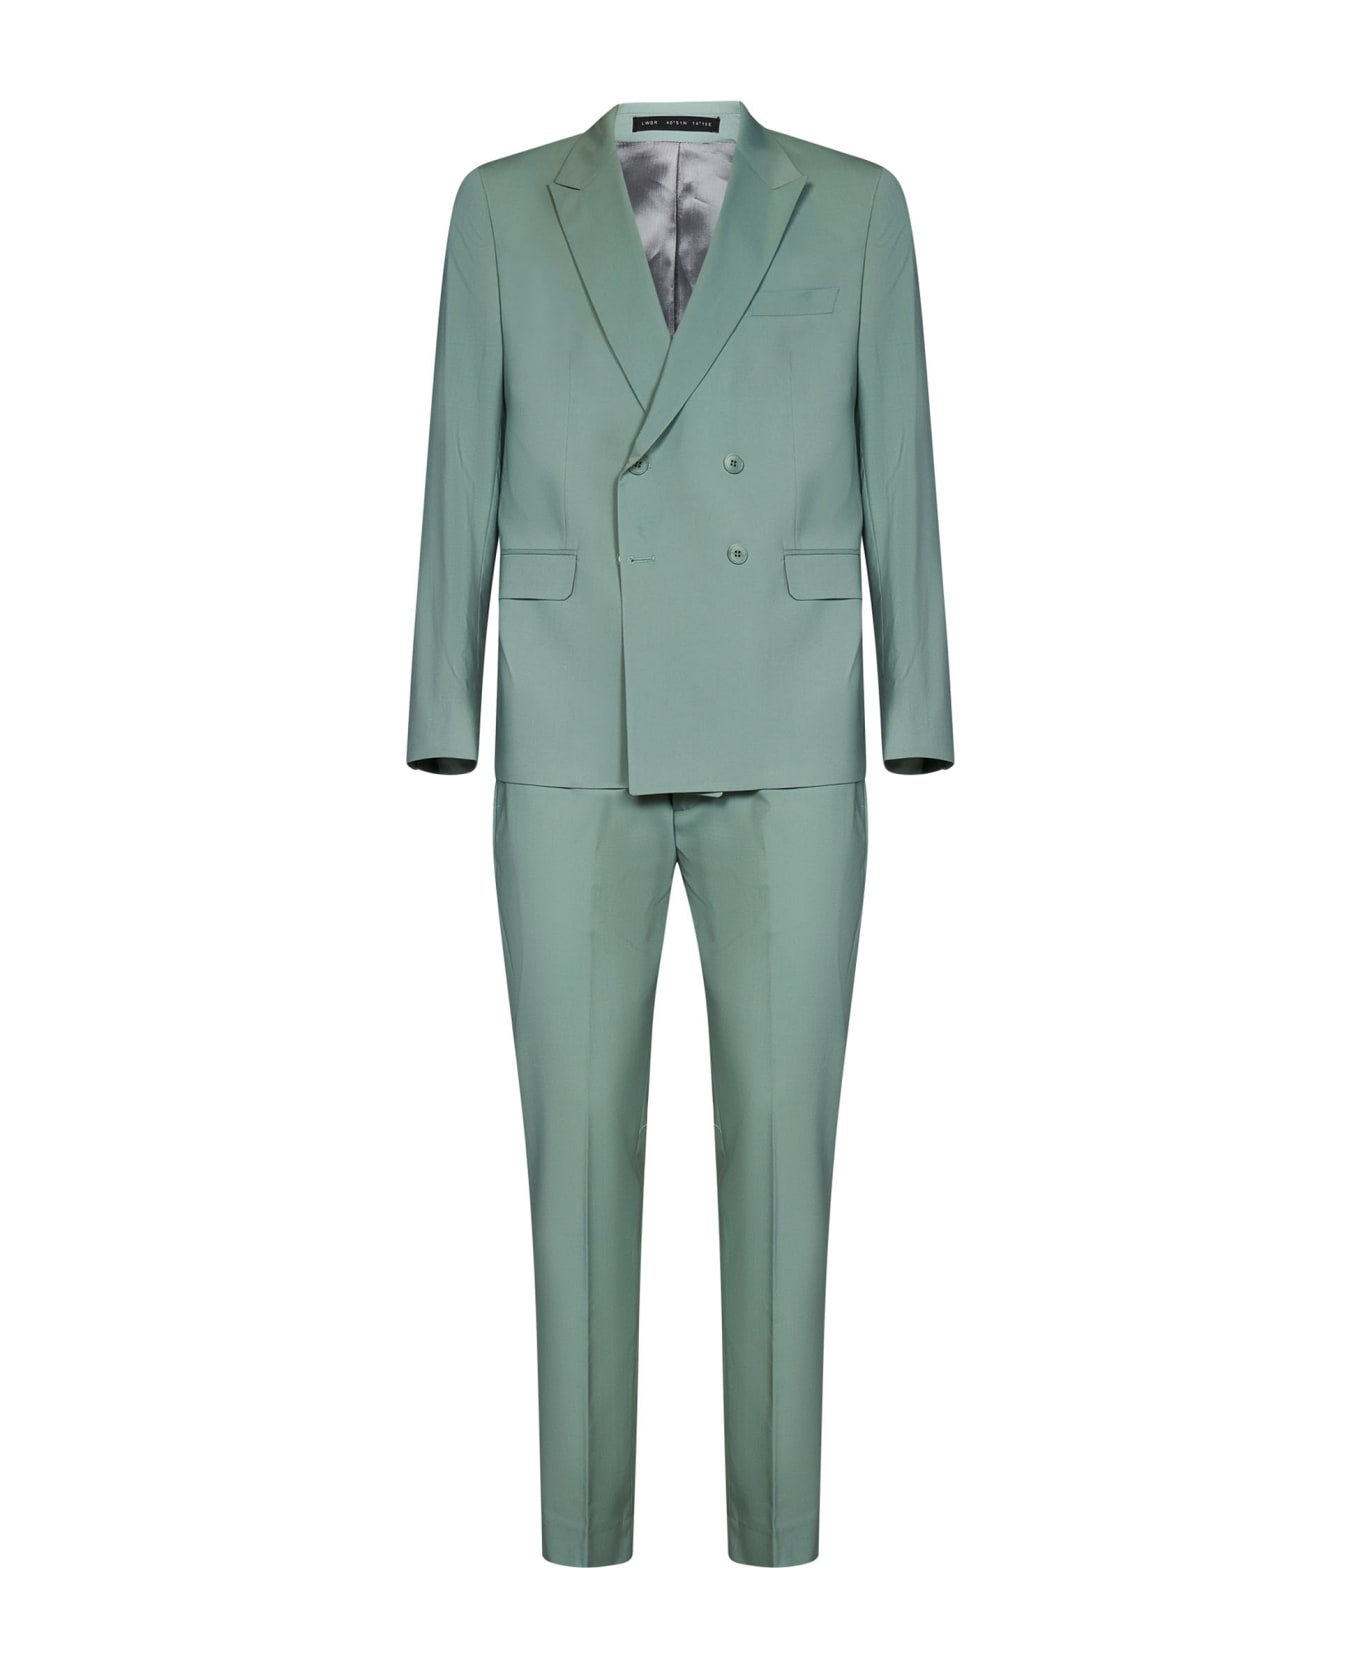 Low Brand Suit - Green